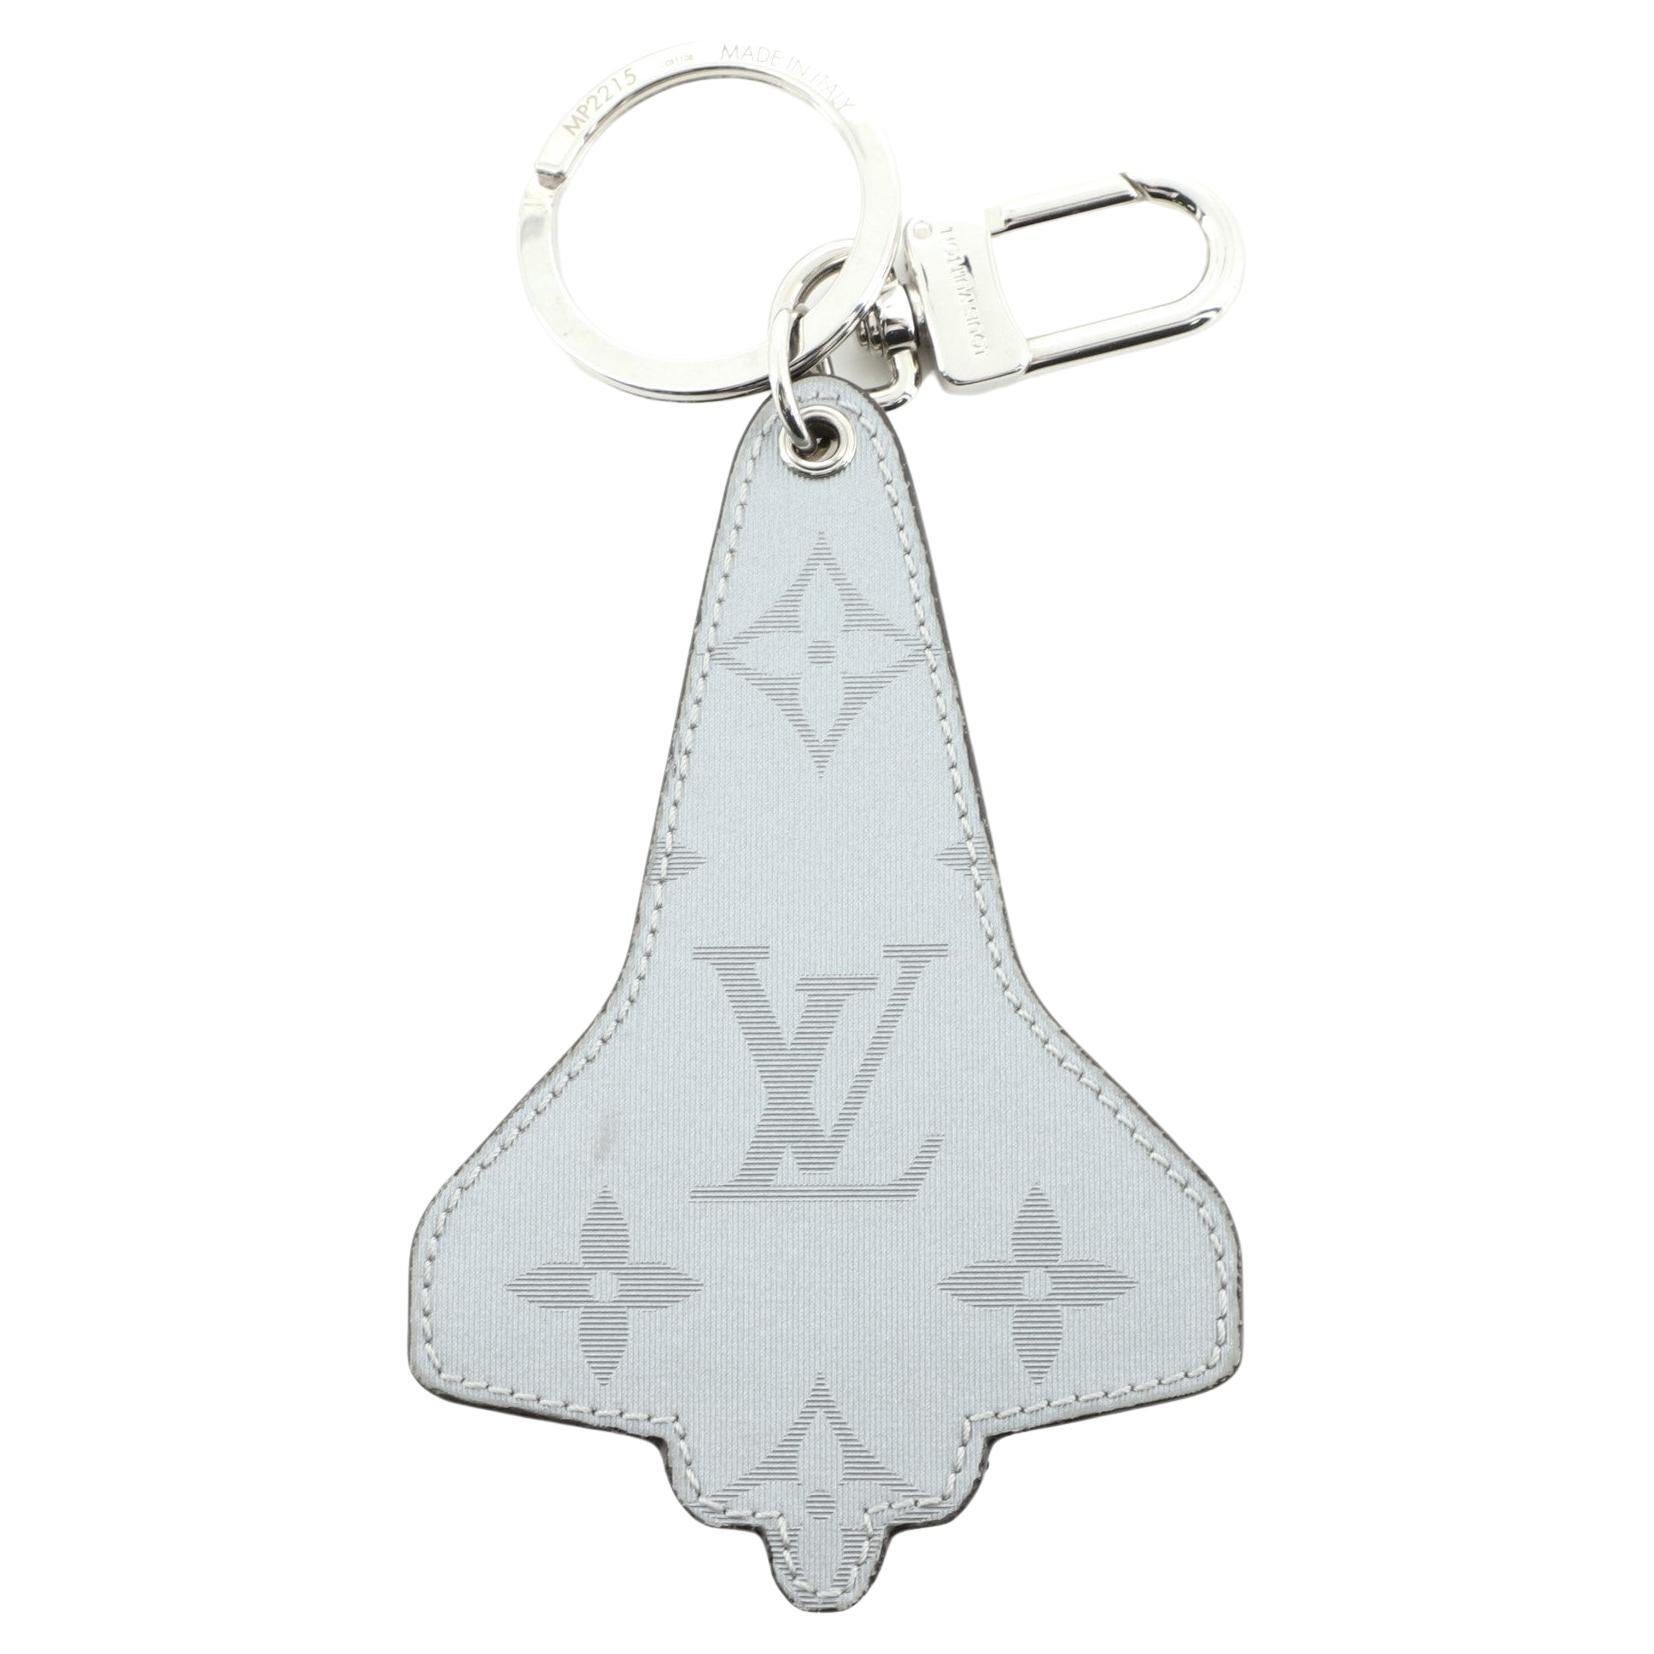 Louis Vuitton Mascot Rocket Bag Charm and Key Holder Printed Leather 